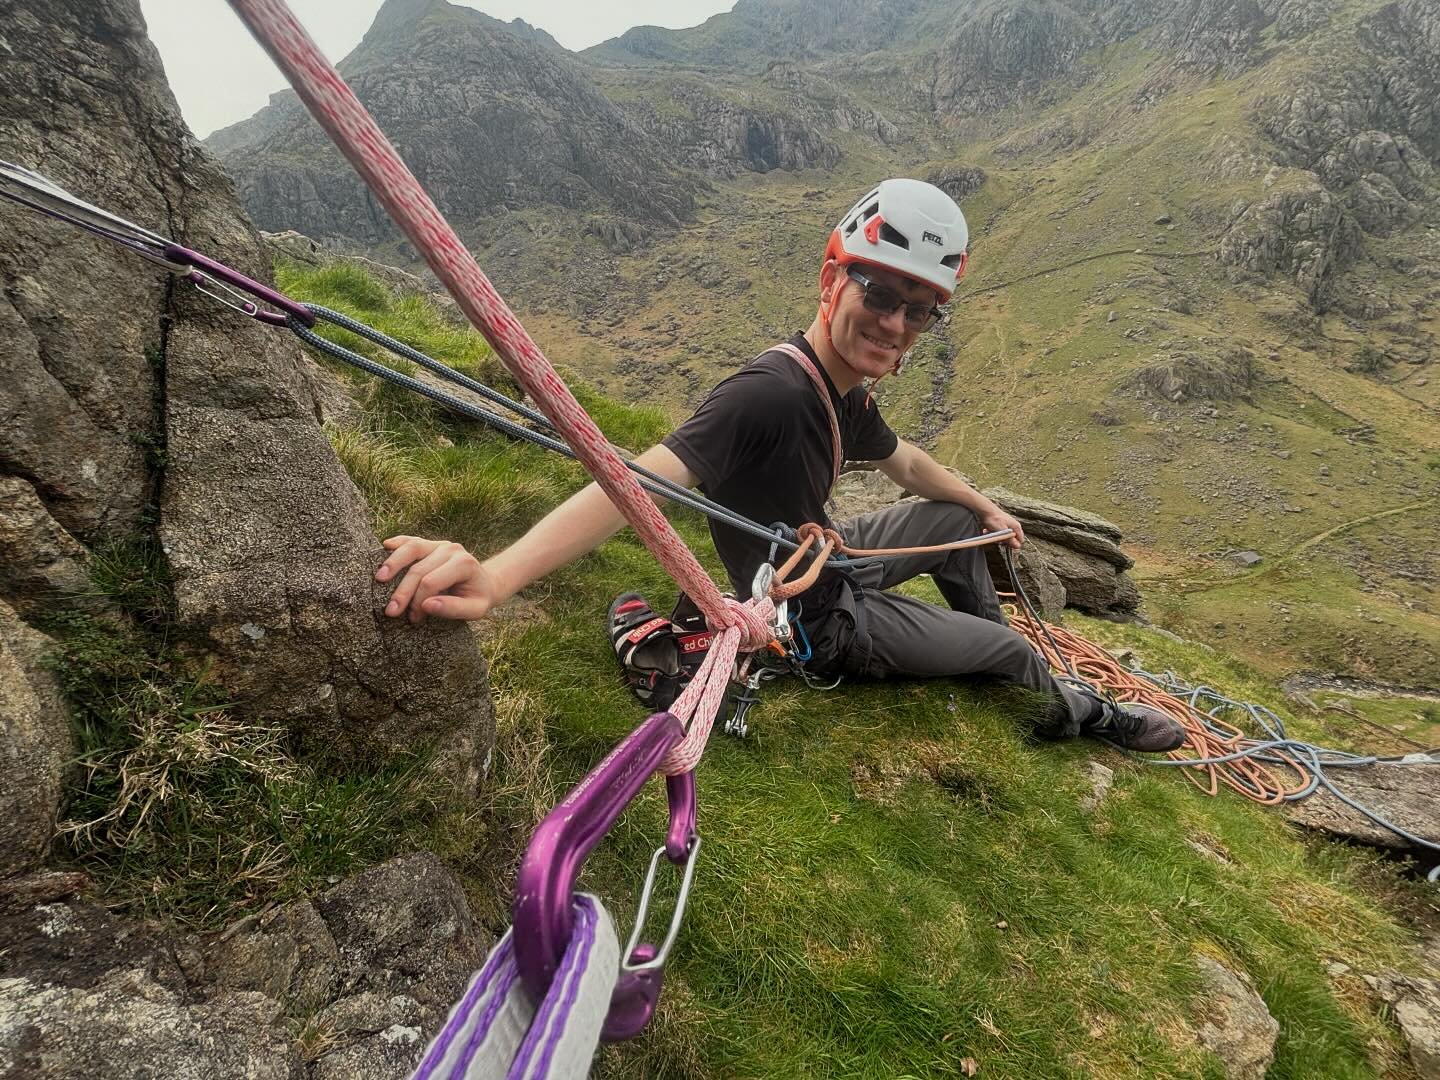 All around climbing skills with Lloyd this week. Some classic slate and multipitch in the pass. 

#rockclimbing #learntoclimb #tradclimbing #learntoclimb #climbingphoto @ami_professionals @themountaineeringcompany @v12_outdoor